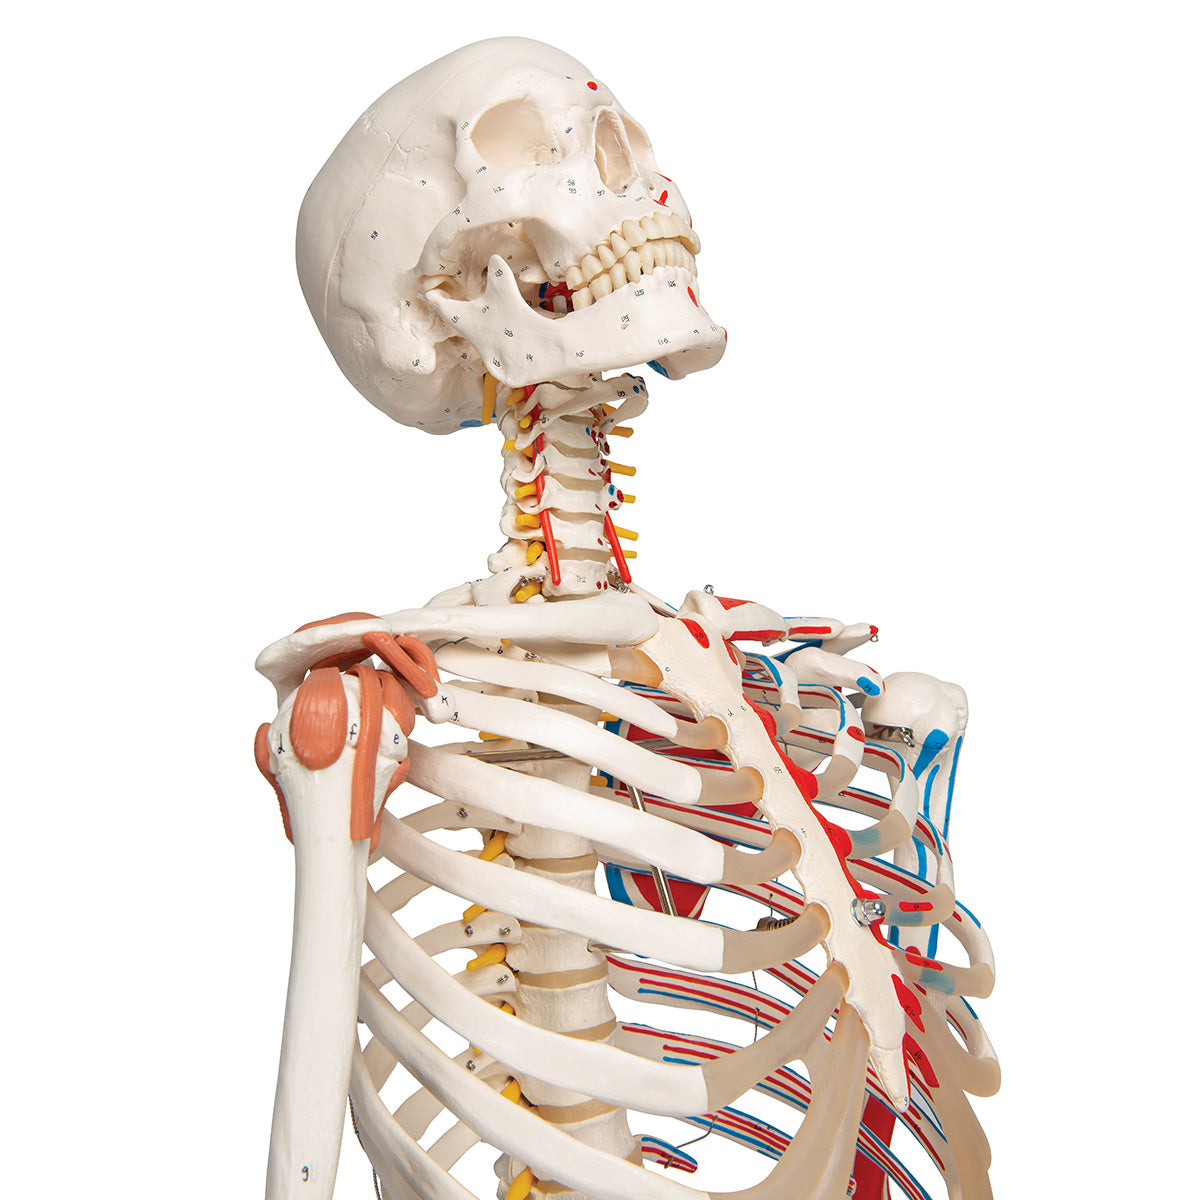 Which skeleton is right for me?